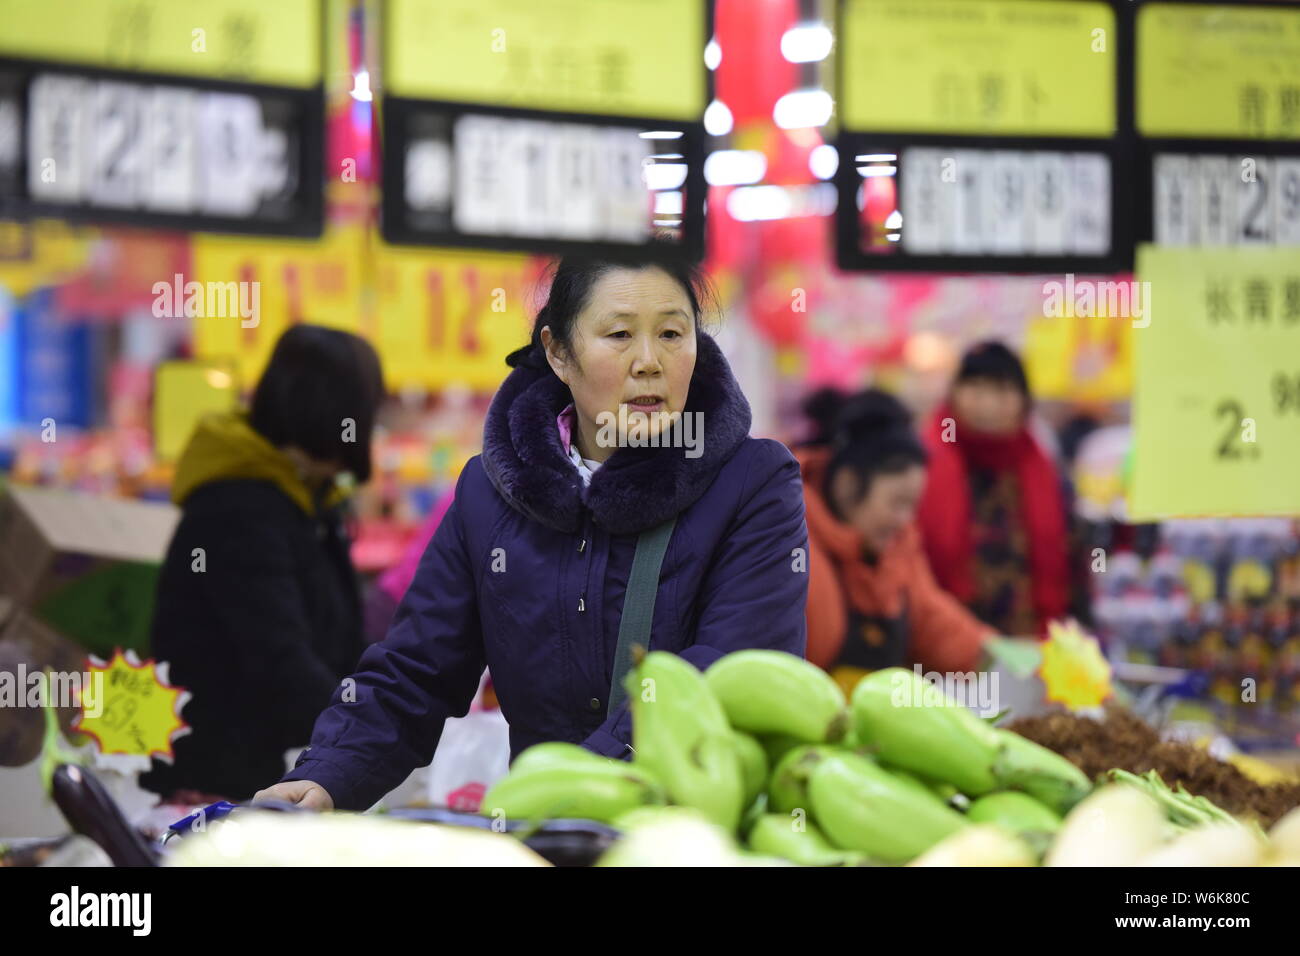 A customer shops for vegetables at a supermarket in Fuyang city, east China's Anhui province, 9 February 2018.   China's Consumer Confidence Index or Stock Photo